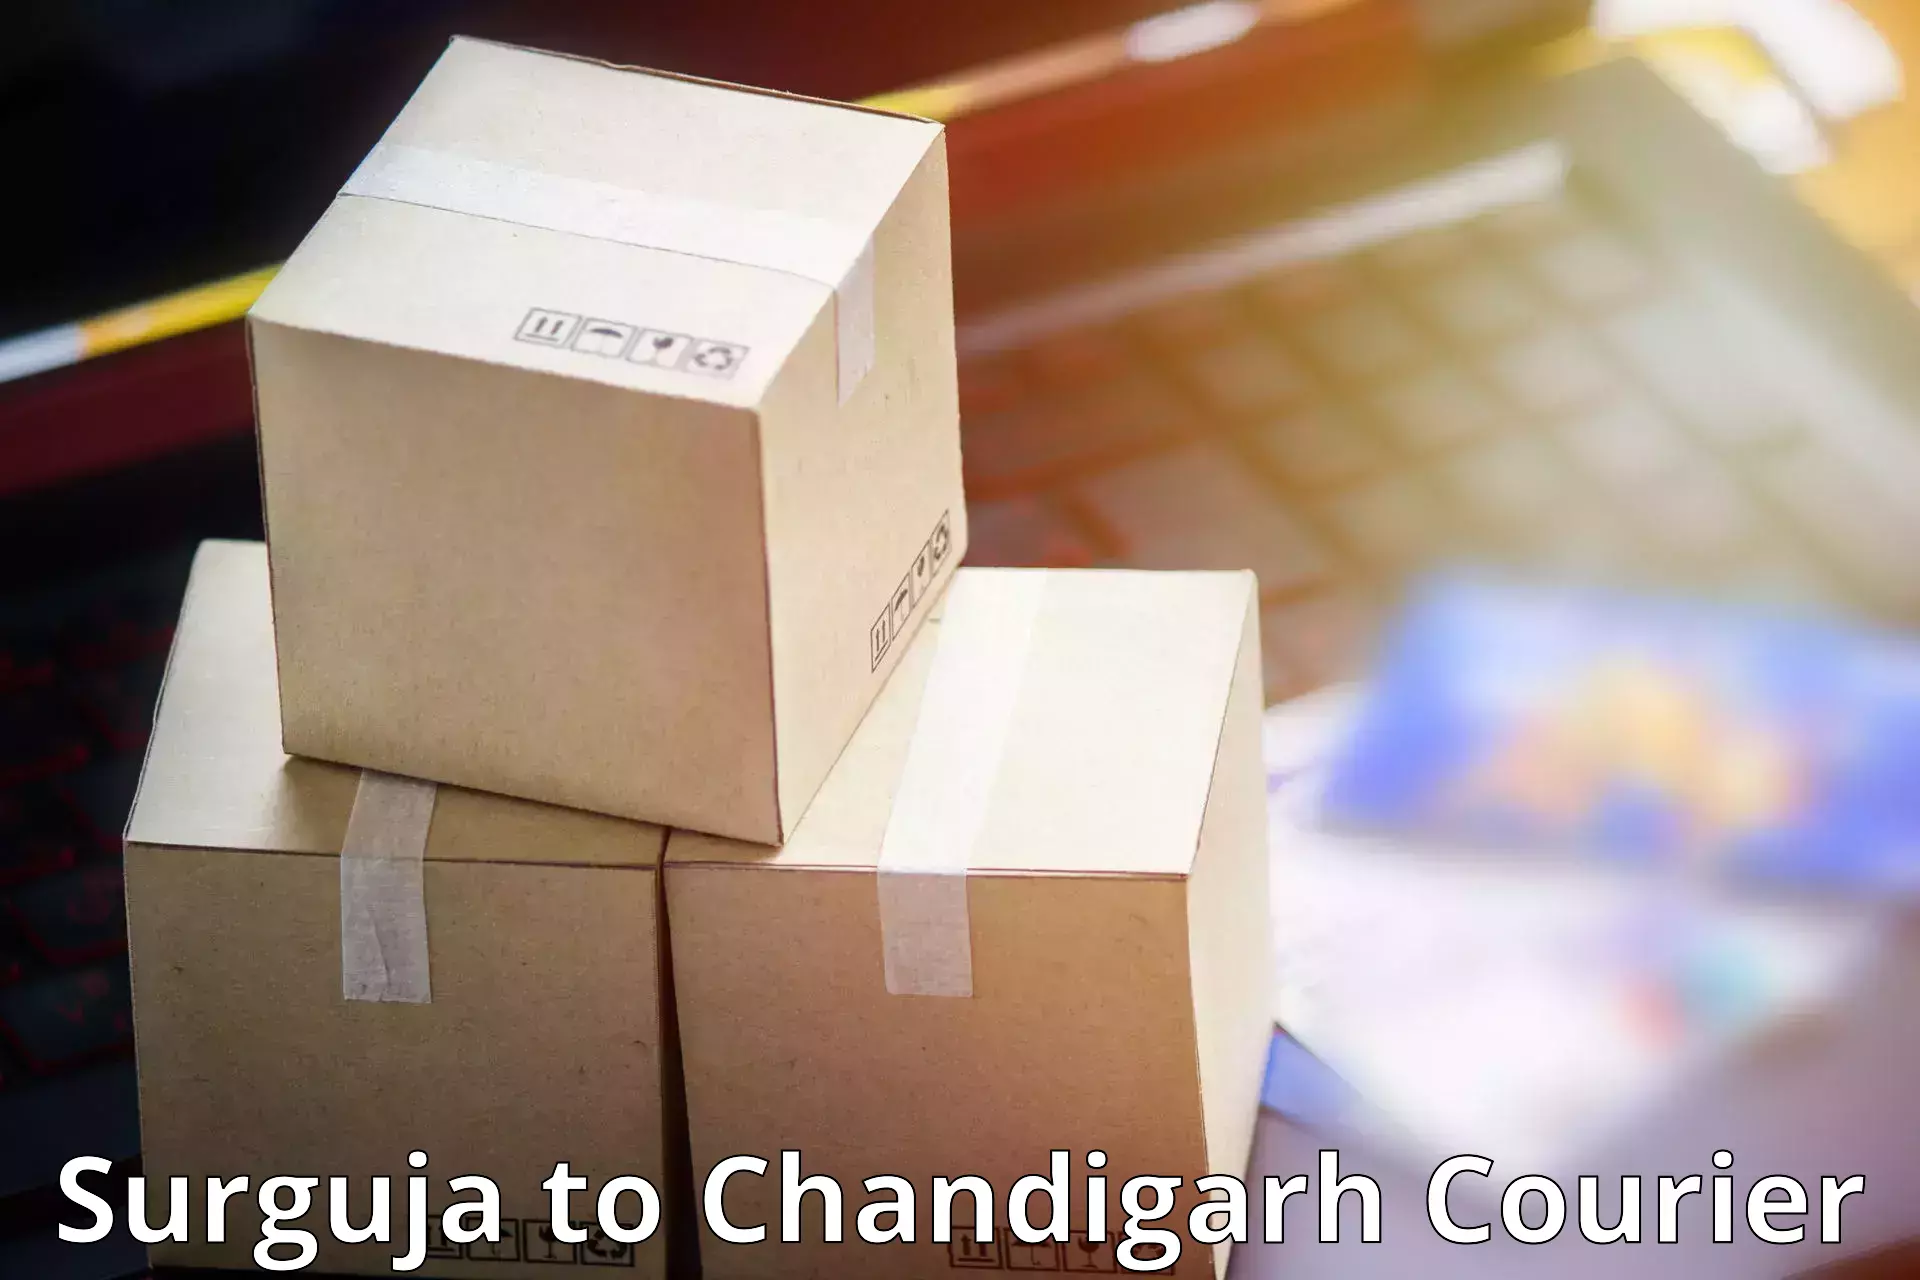 Professional courier handling Surguja to Chandigarh